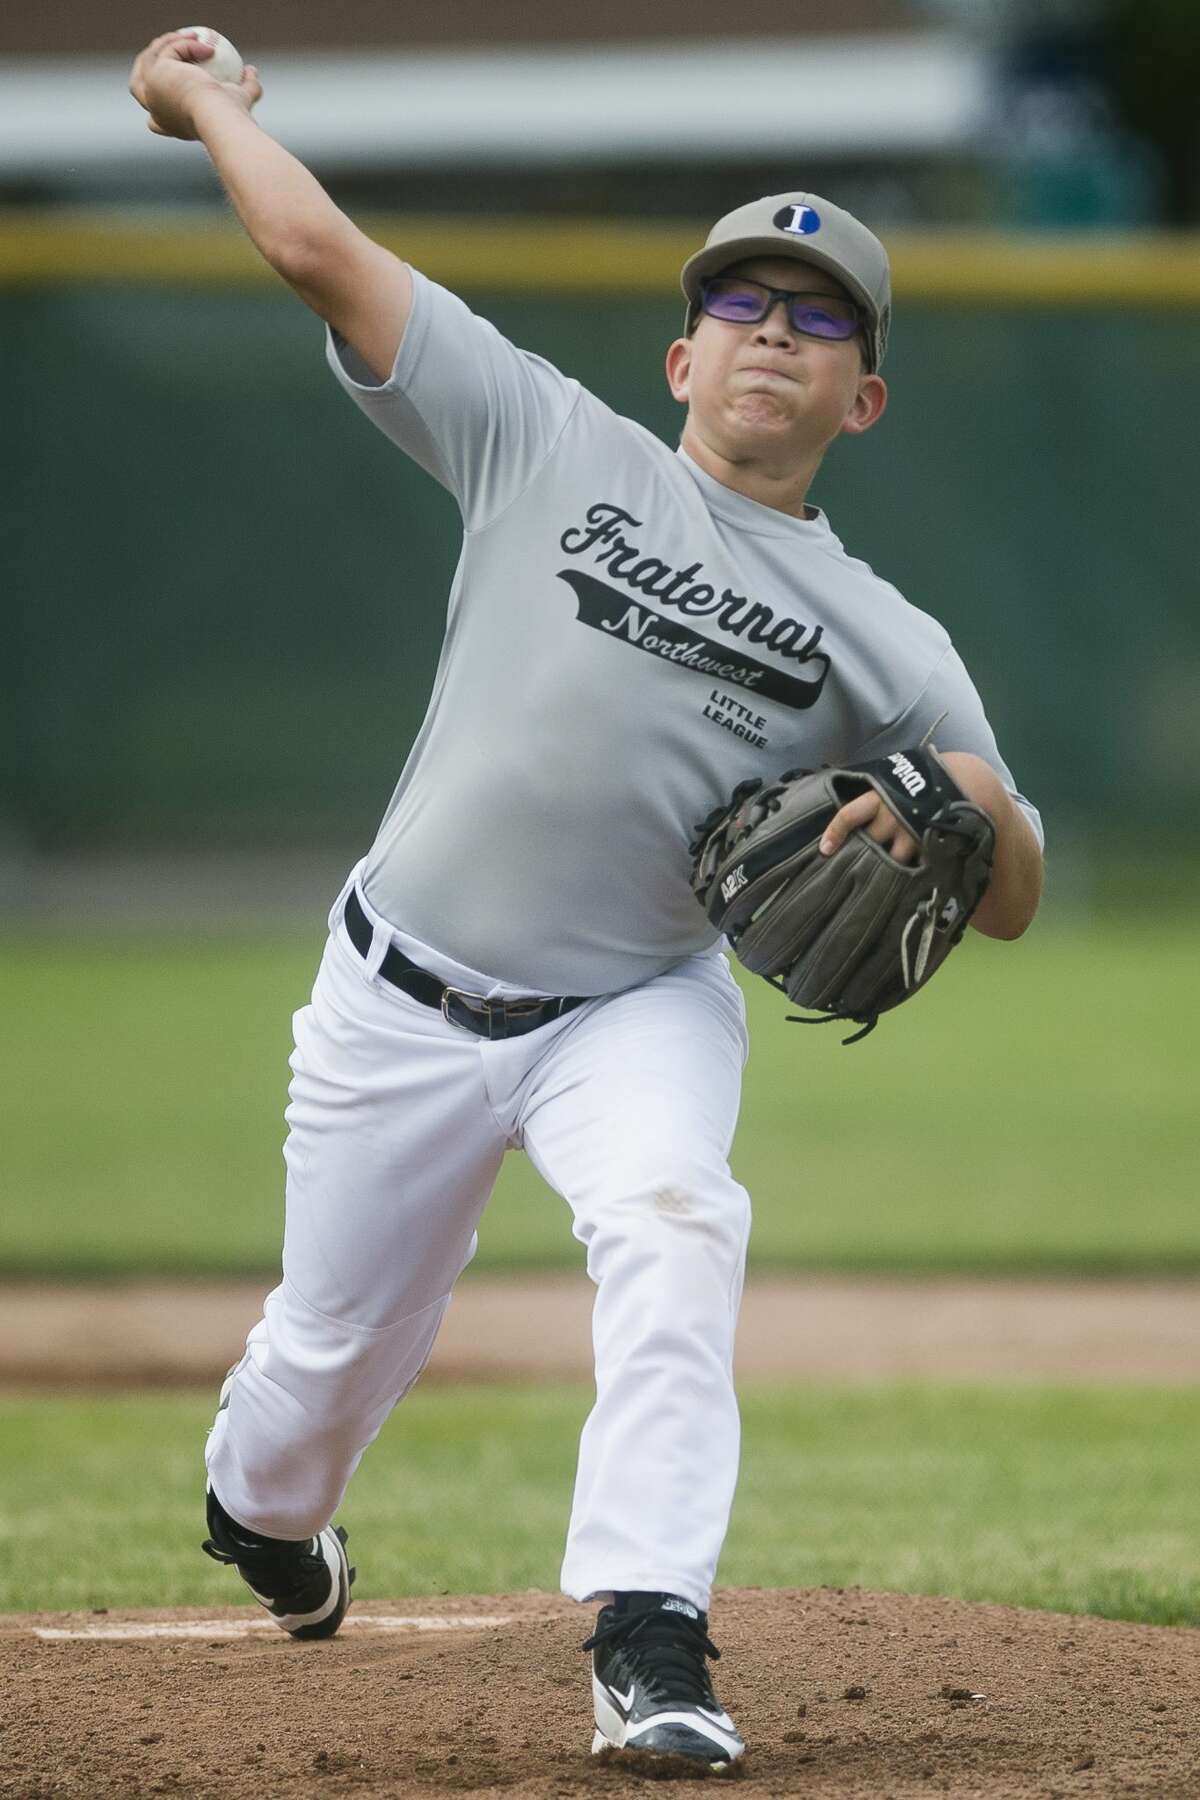 Jay Worsley pitches the ball during his team's 12-2 victory over Sowle Properties during the major Little League city championship game on Tuesday, June 20, 2017 in Midland.